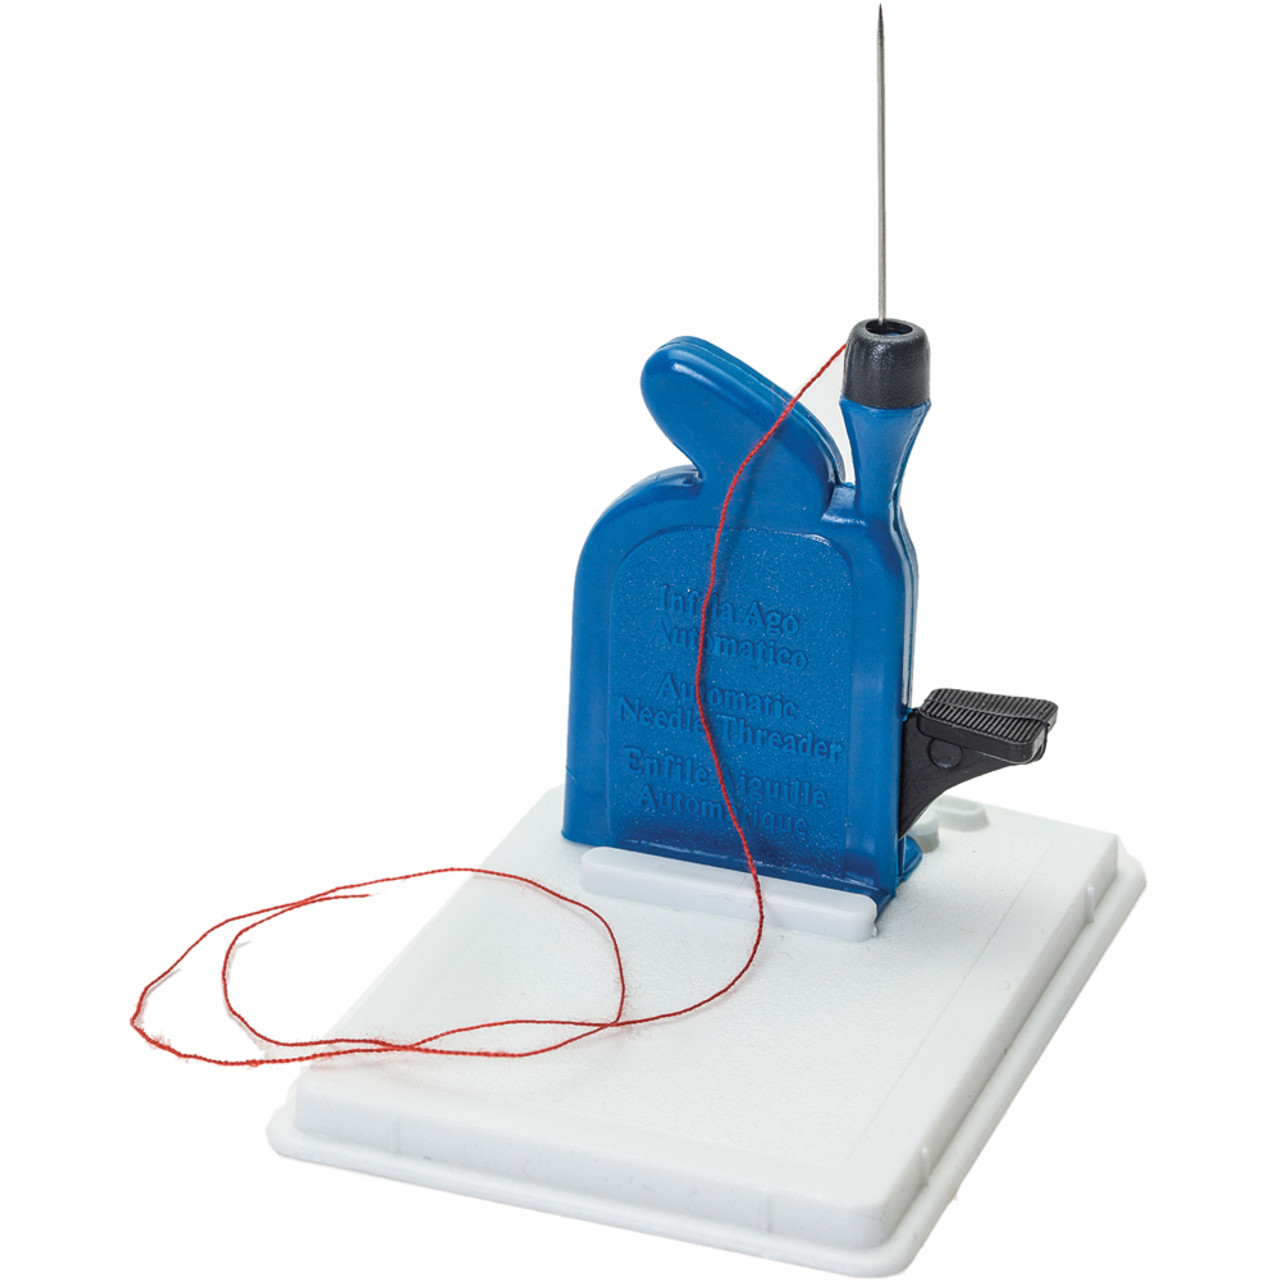 Needle Threader for Sewing Machine – The Low Vision Store